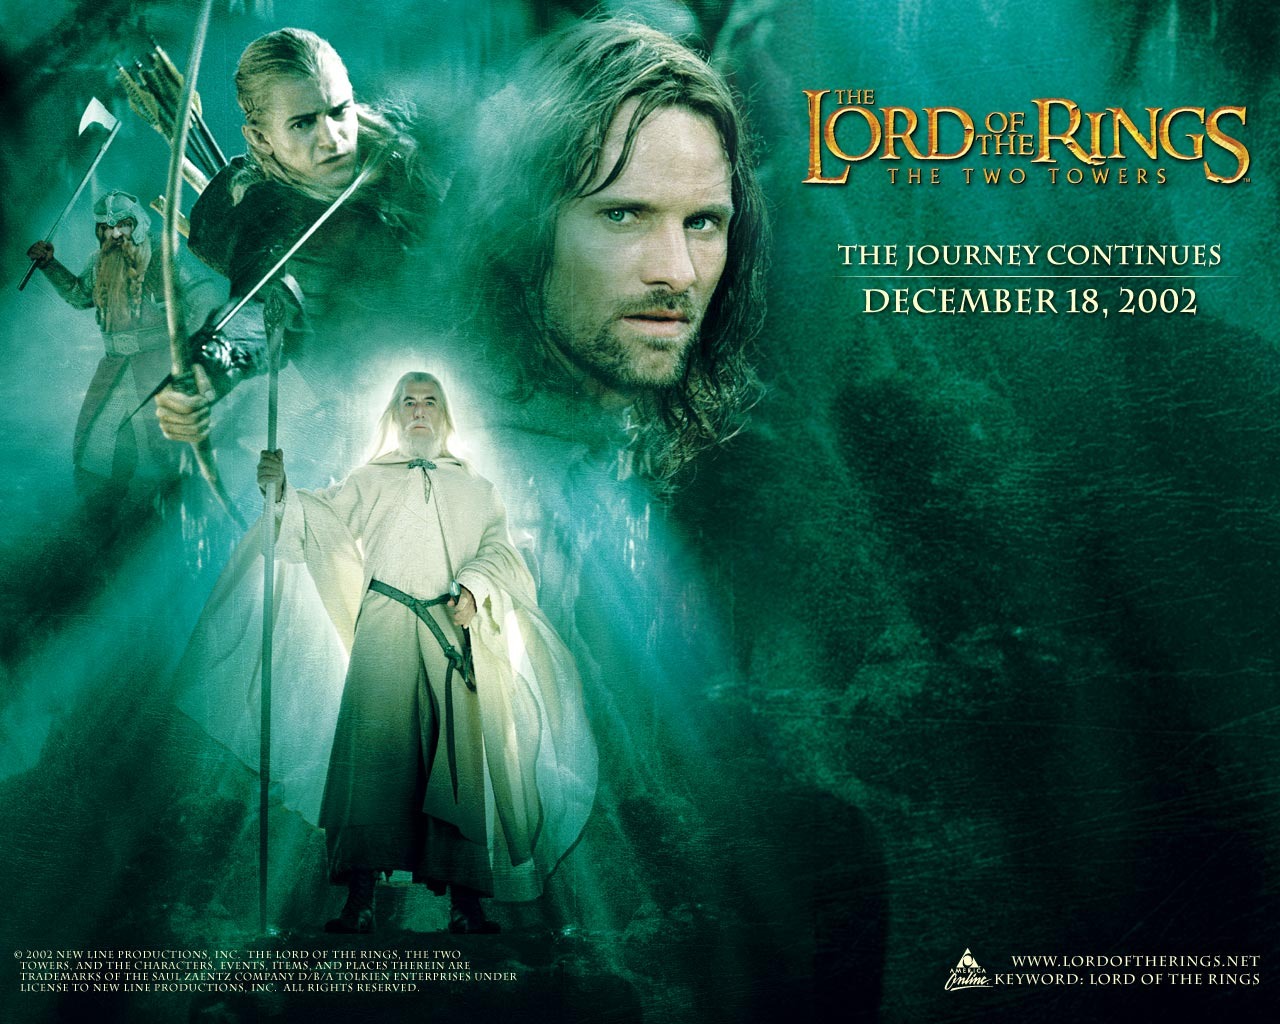 The Lord of the Rings 指環王 #4 - 1280x1024